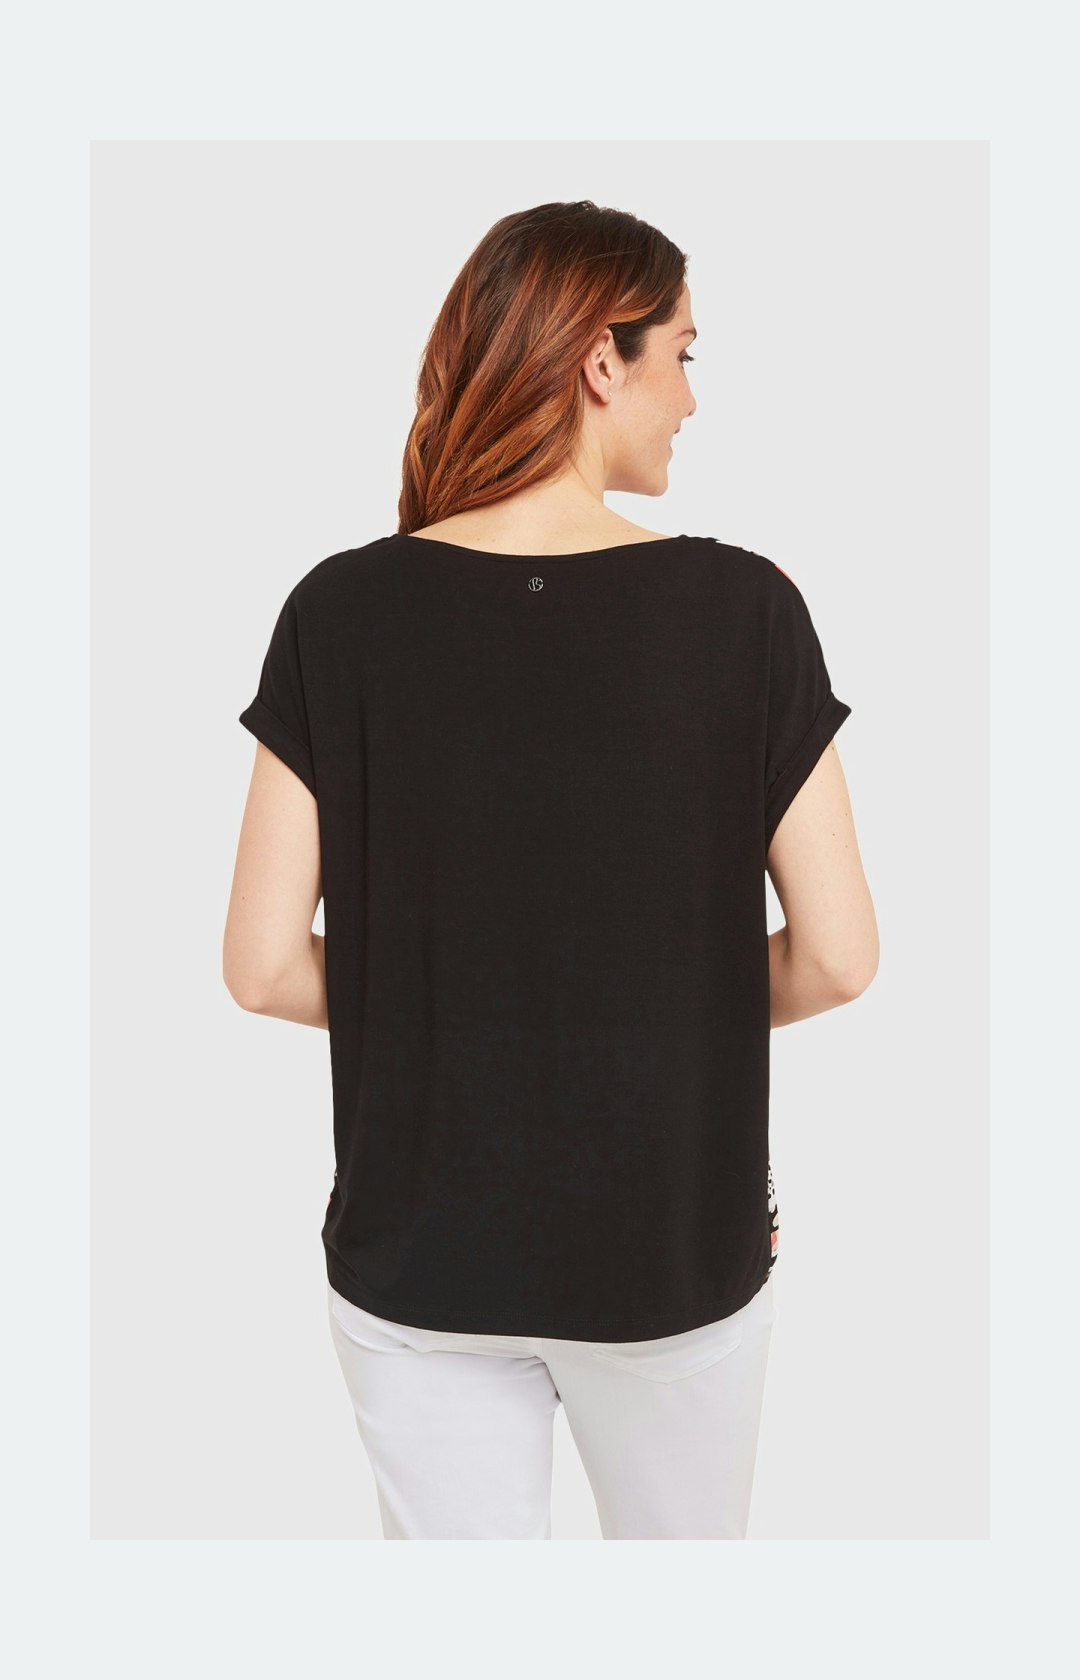 T-Shirt mit Allover-Muster